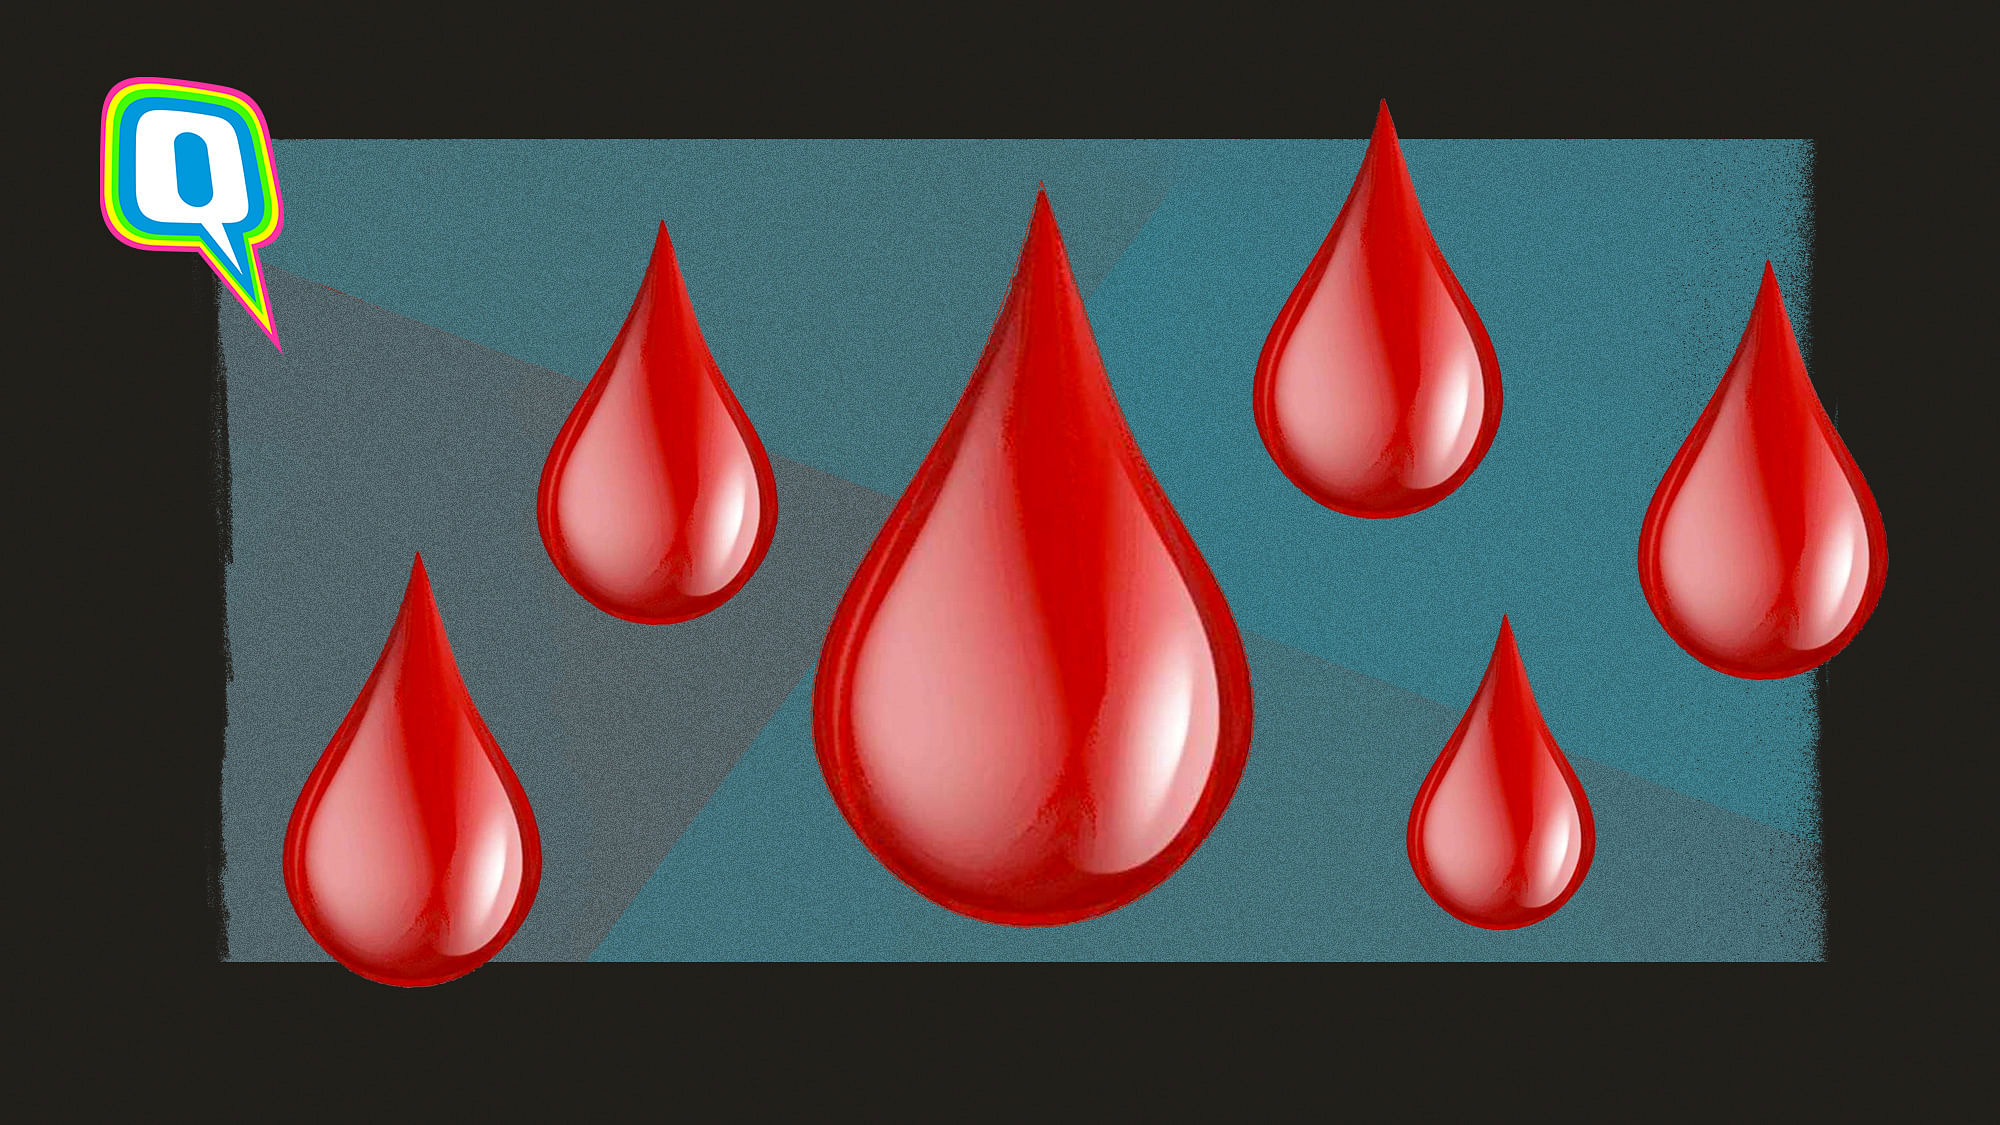 Period emojis FTW, or not?